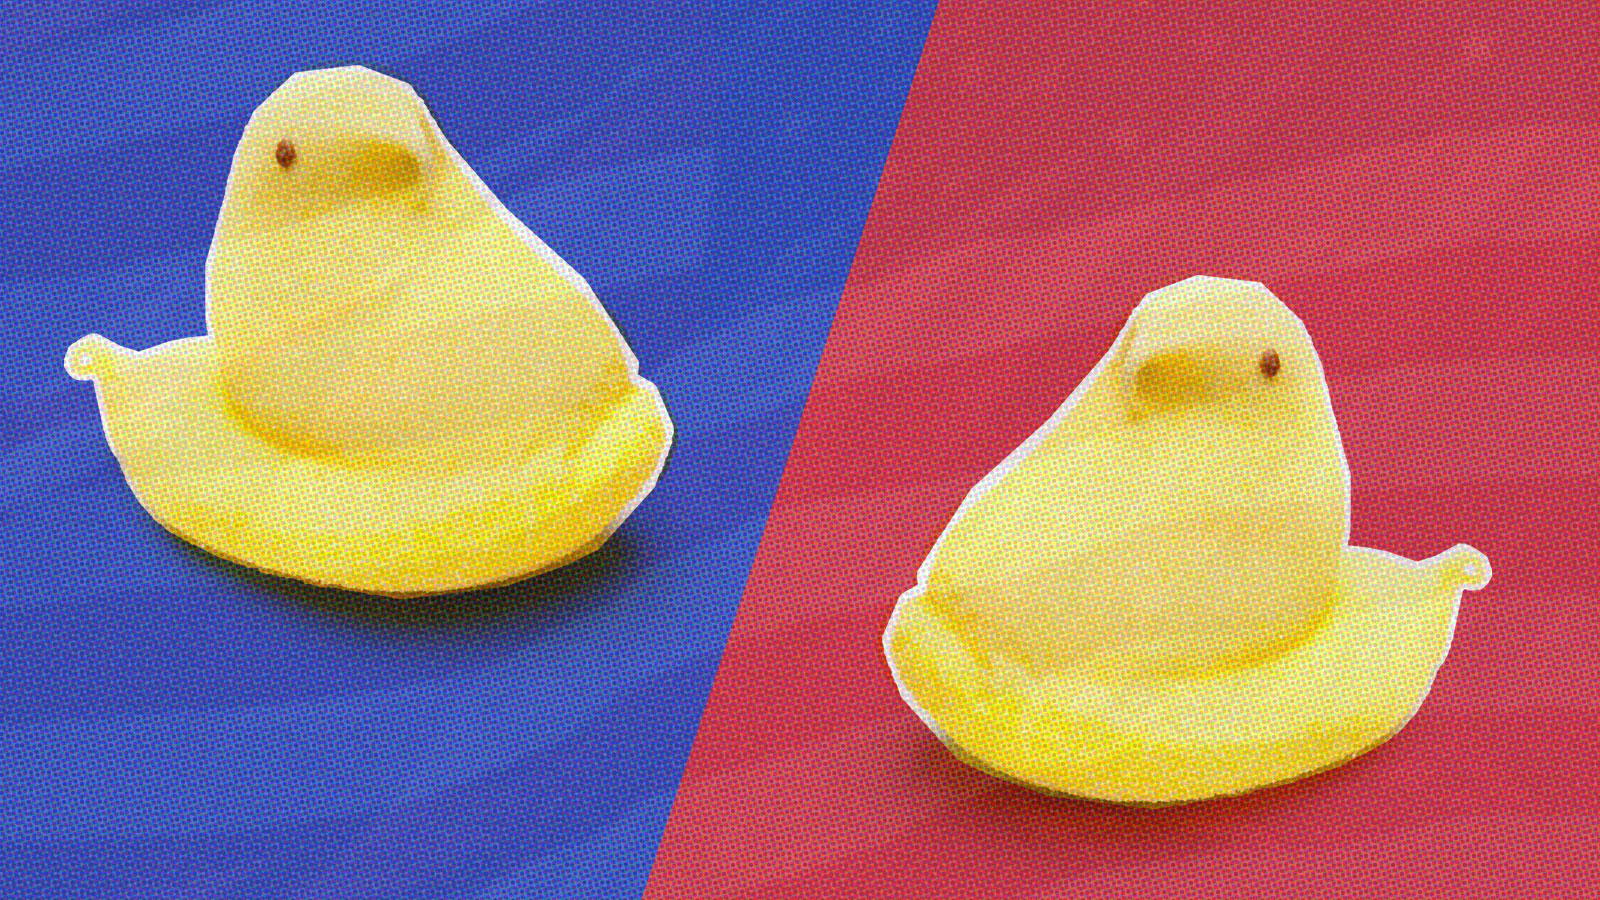 illustration of two marshmallow peeps on a red and blue background